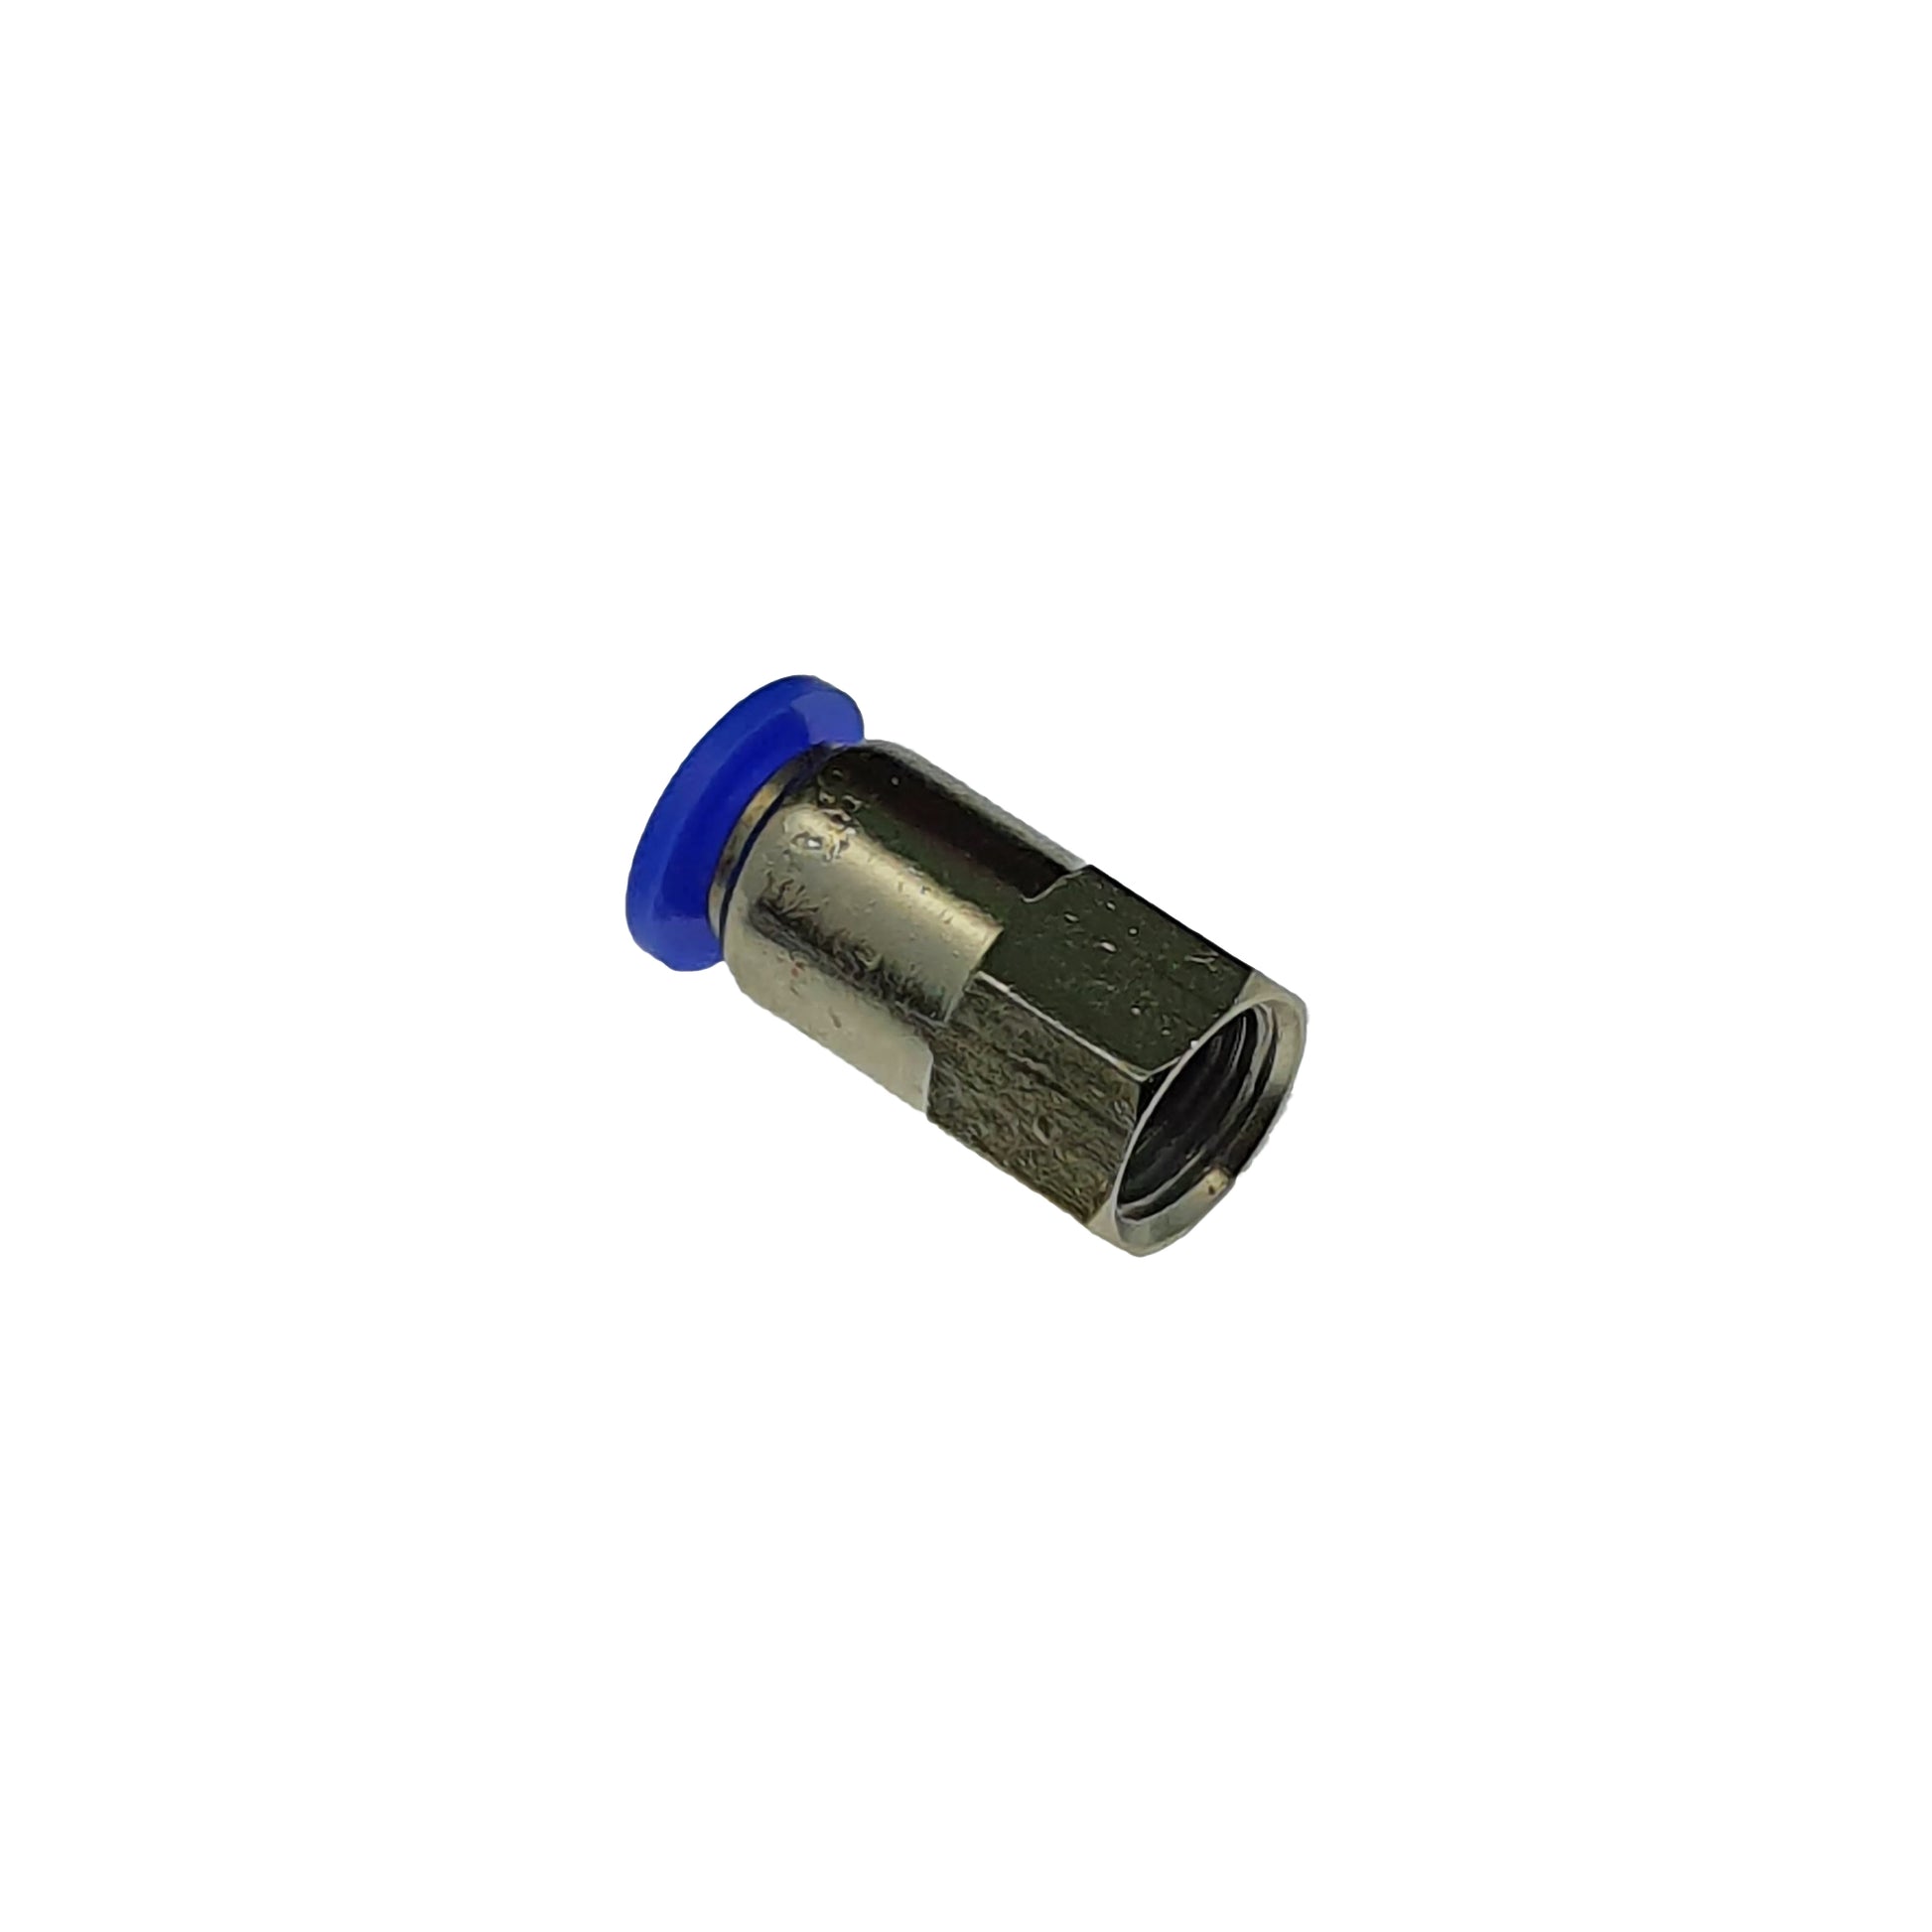 1/8 NPT Female Push-In 6mm Tube Connector